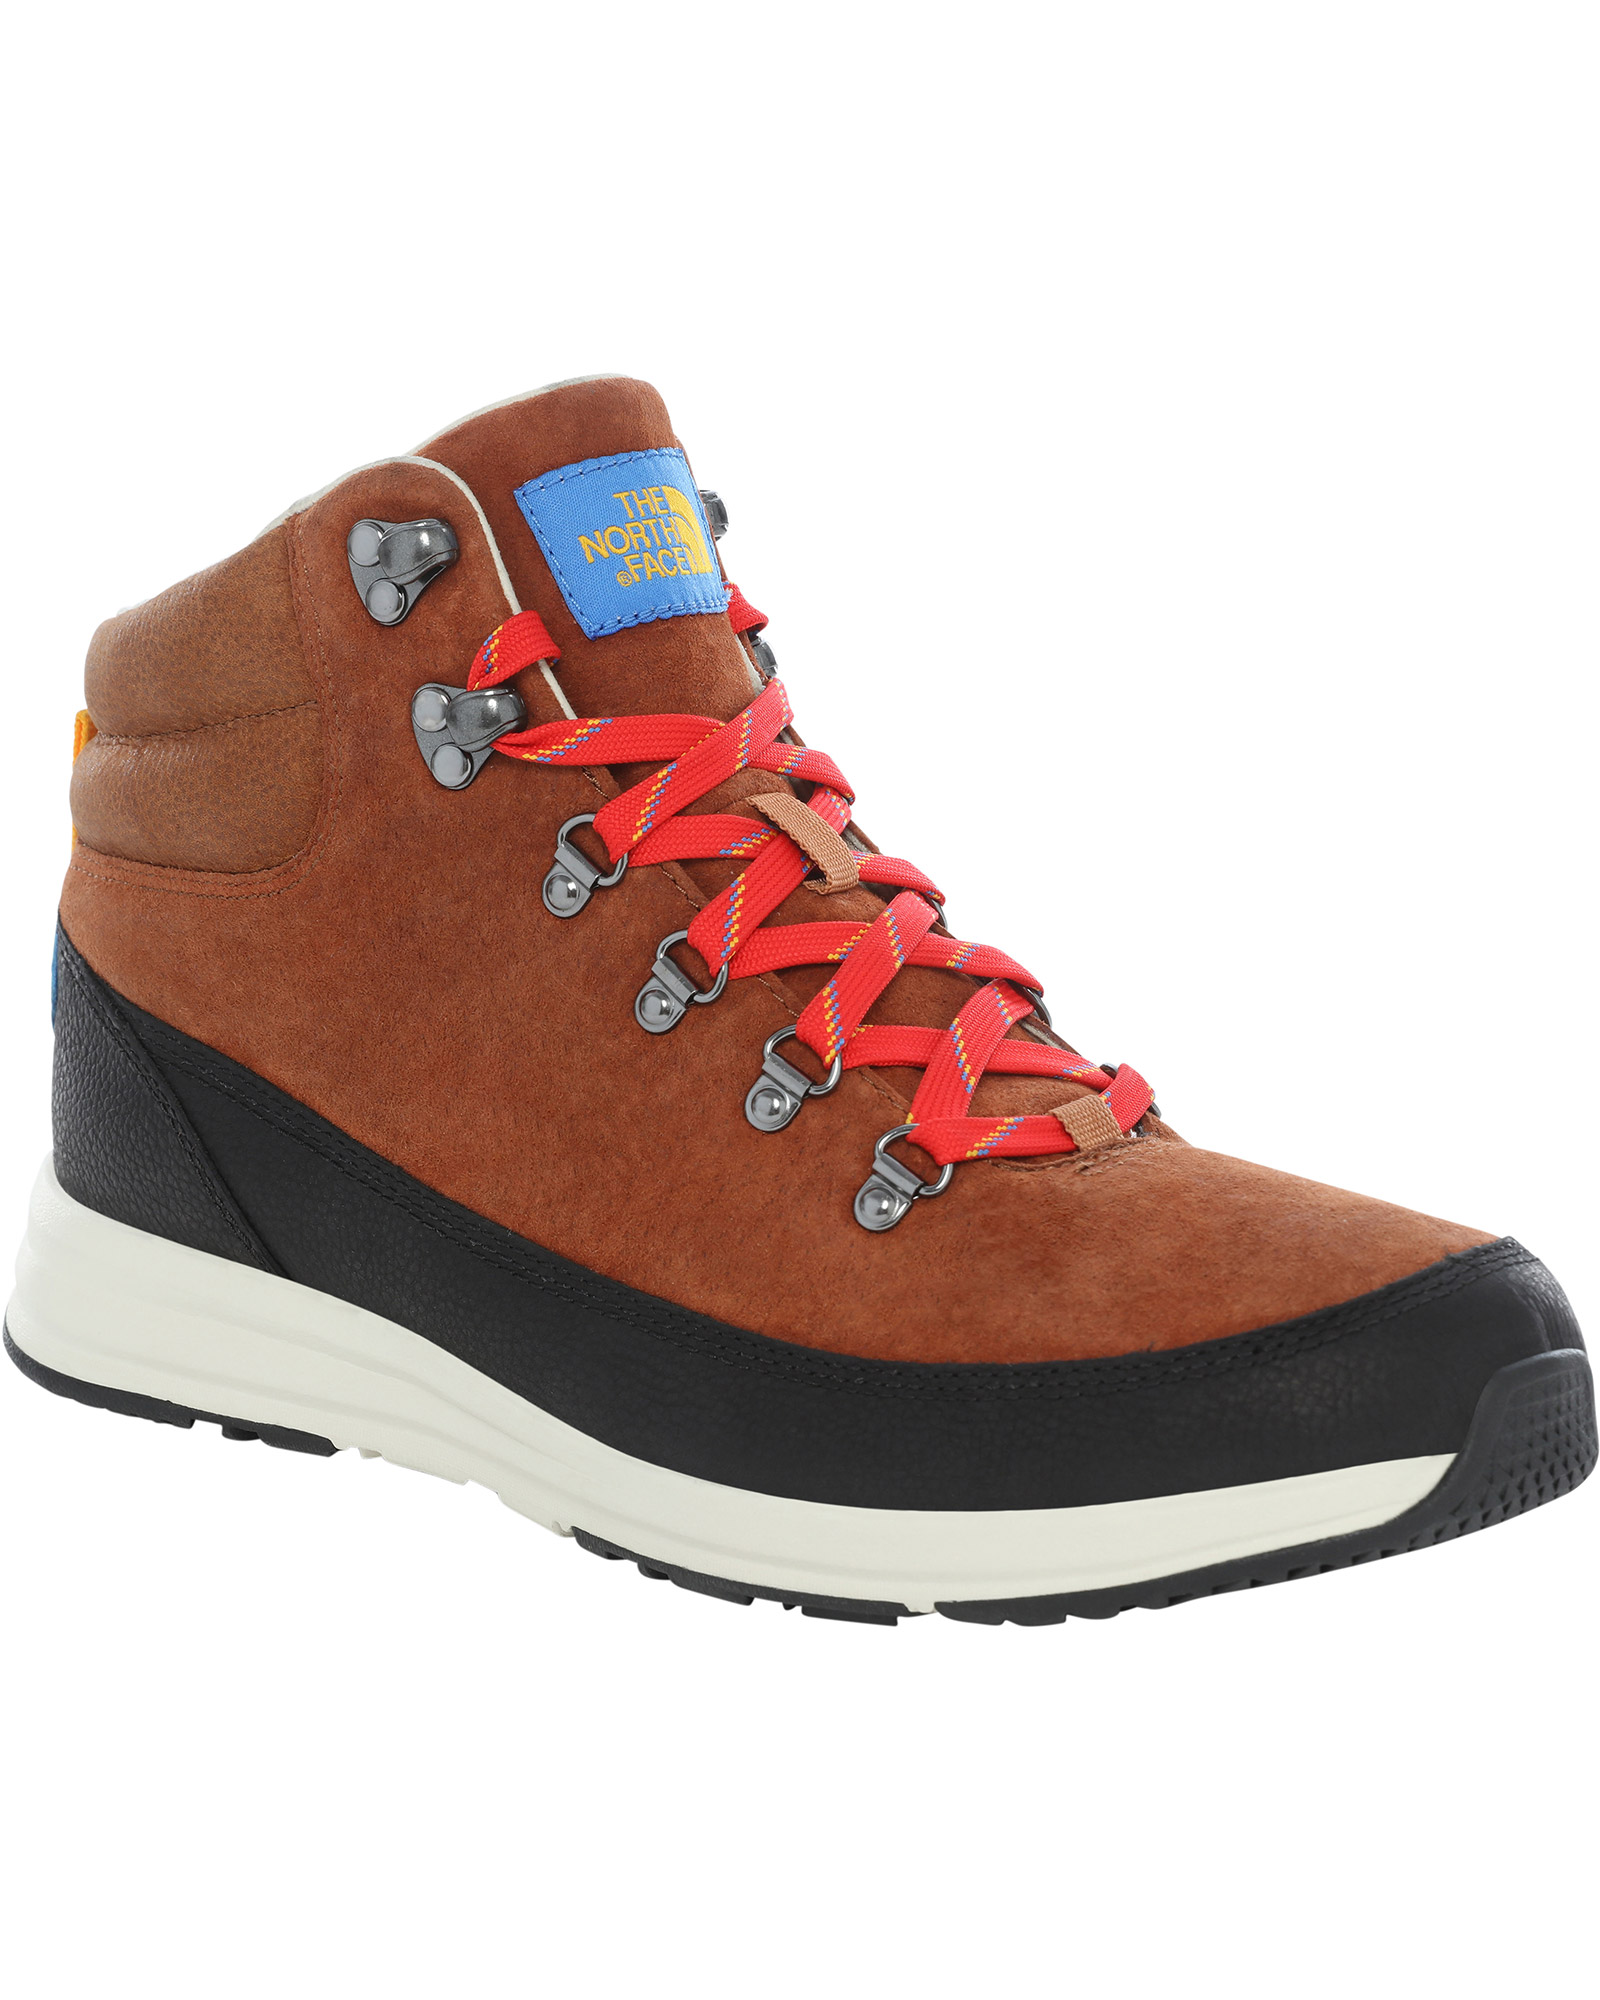 mens north face back to berkeley boot